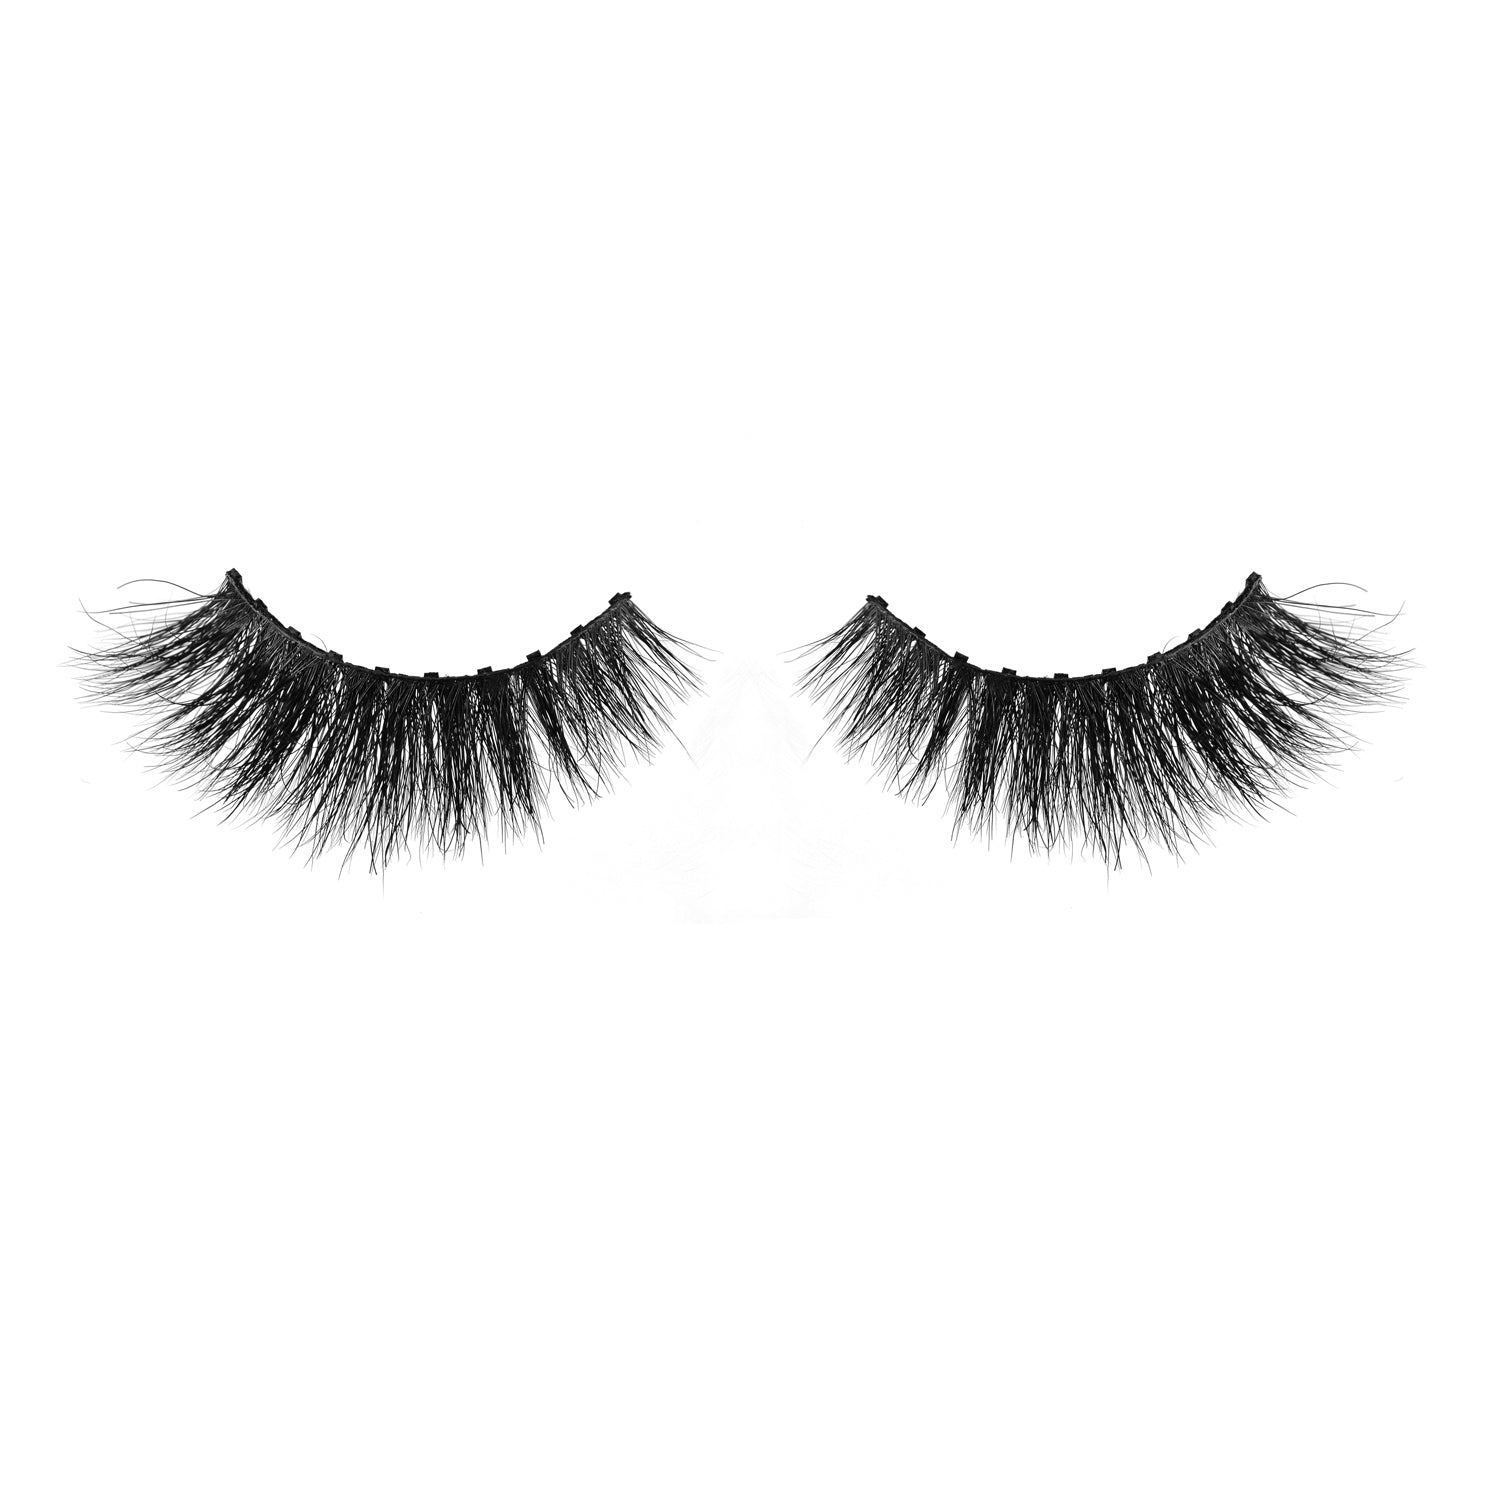 Sydney 3D Mink Lashes - 10 pairs - SindeBella Beauty Store